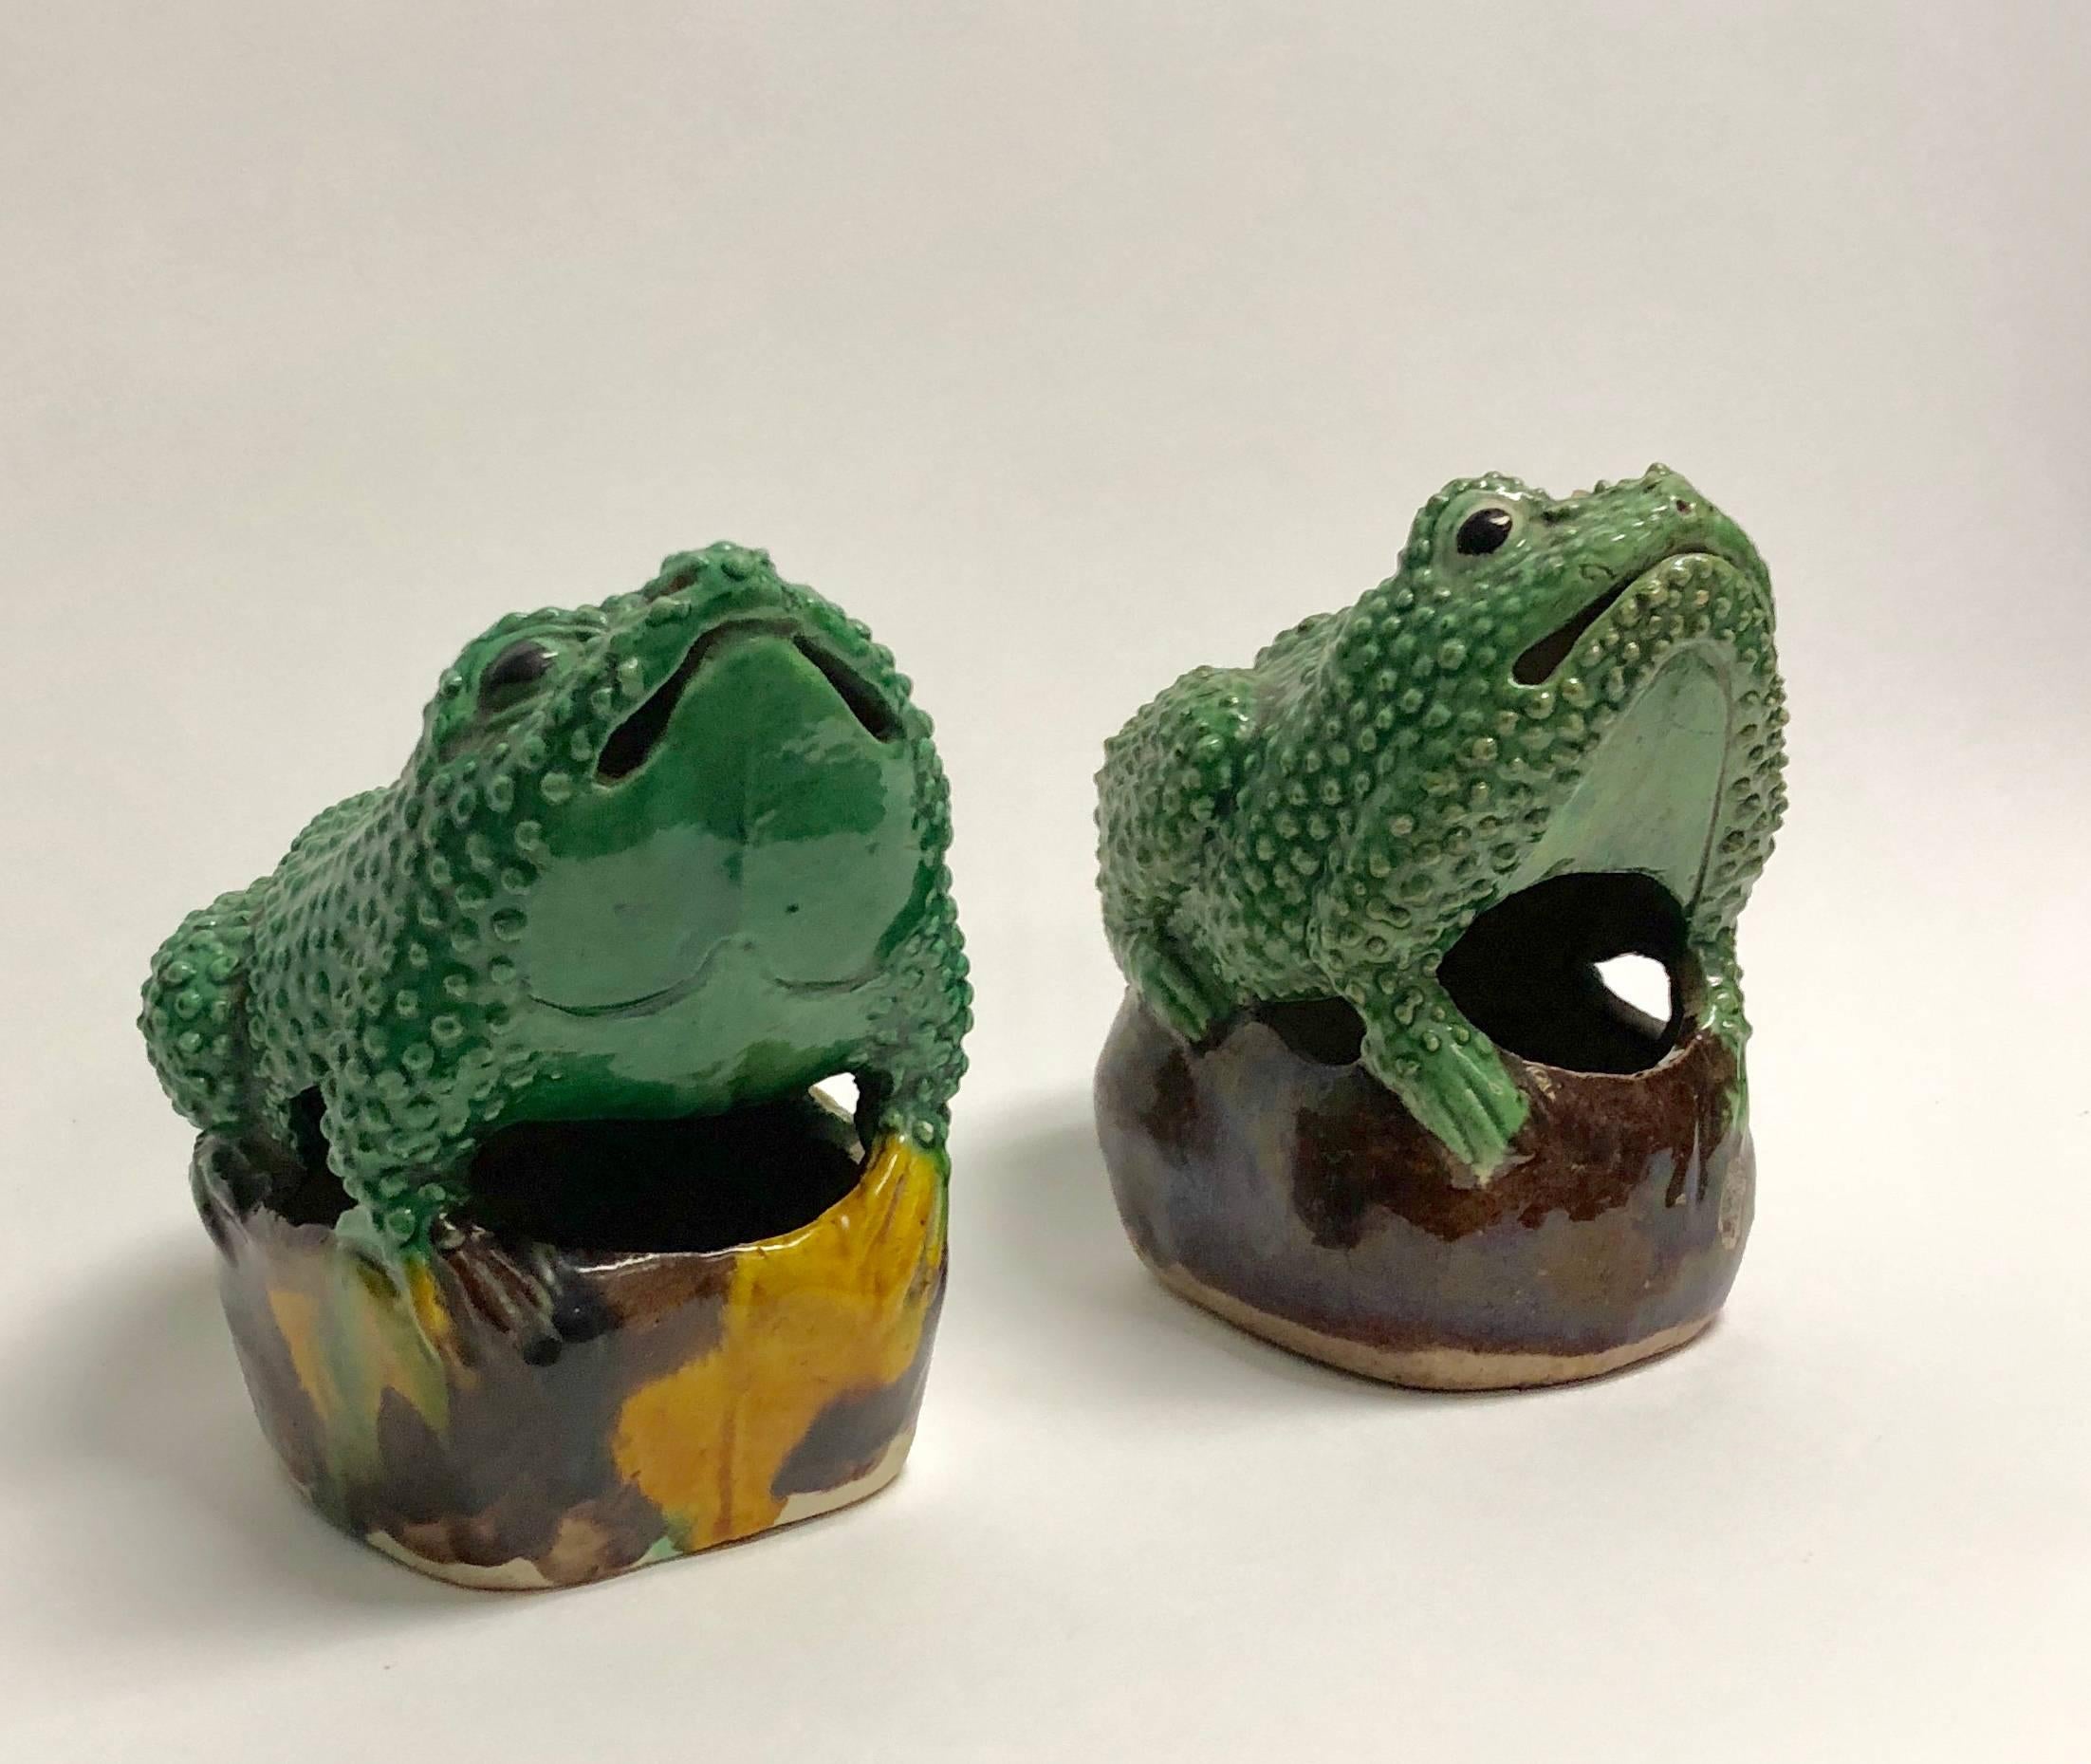 A pair (two frogs), antique 19th century porcelain famille vert egg and spinach glaze brush washer stylish with frogs each perched on a rock. Each frog was individually designed and crafted in shades of green, brown and yellow. Underneath, inside